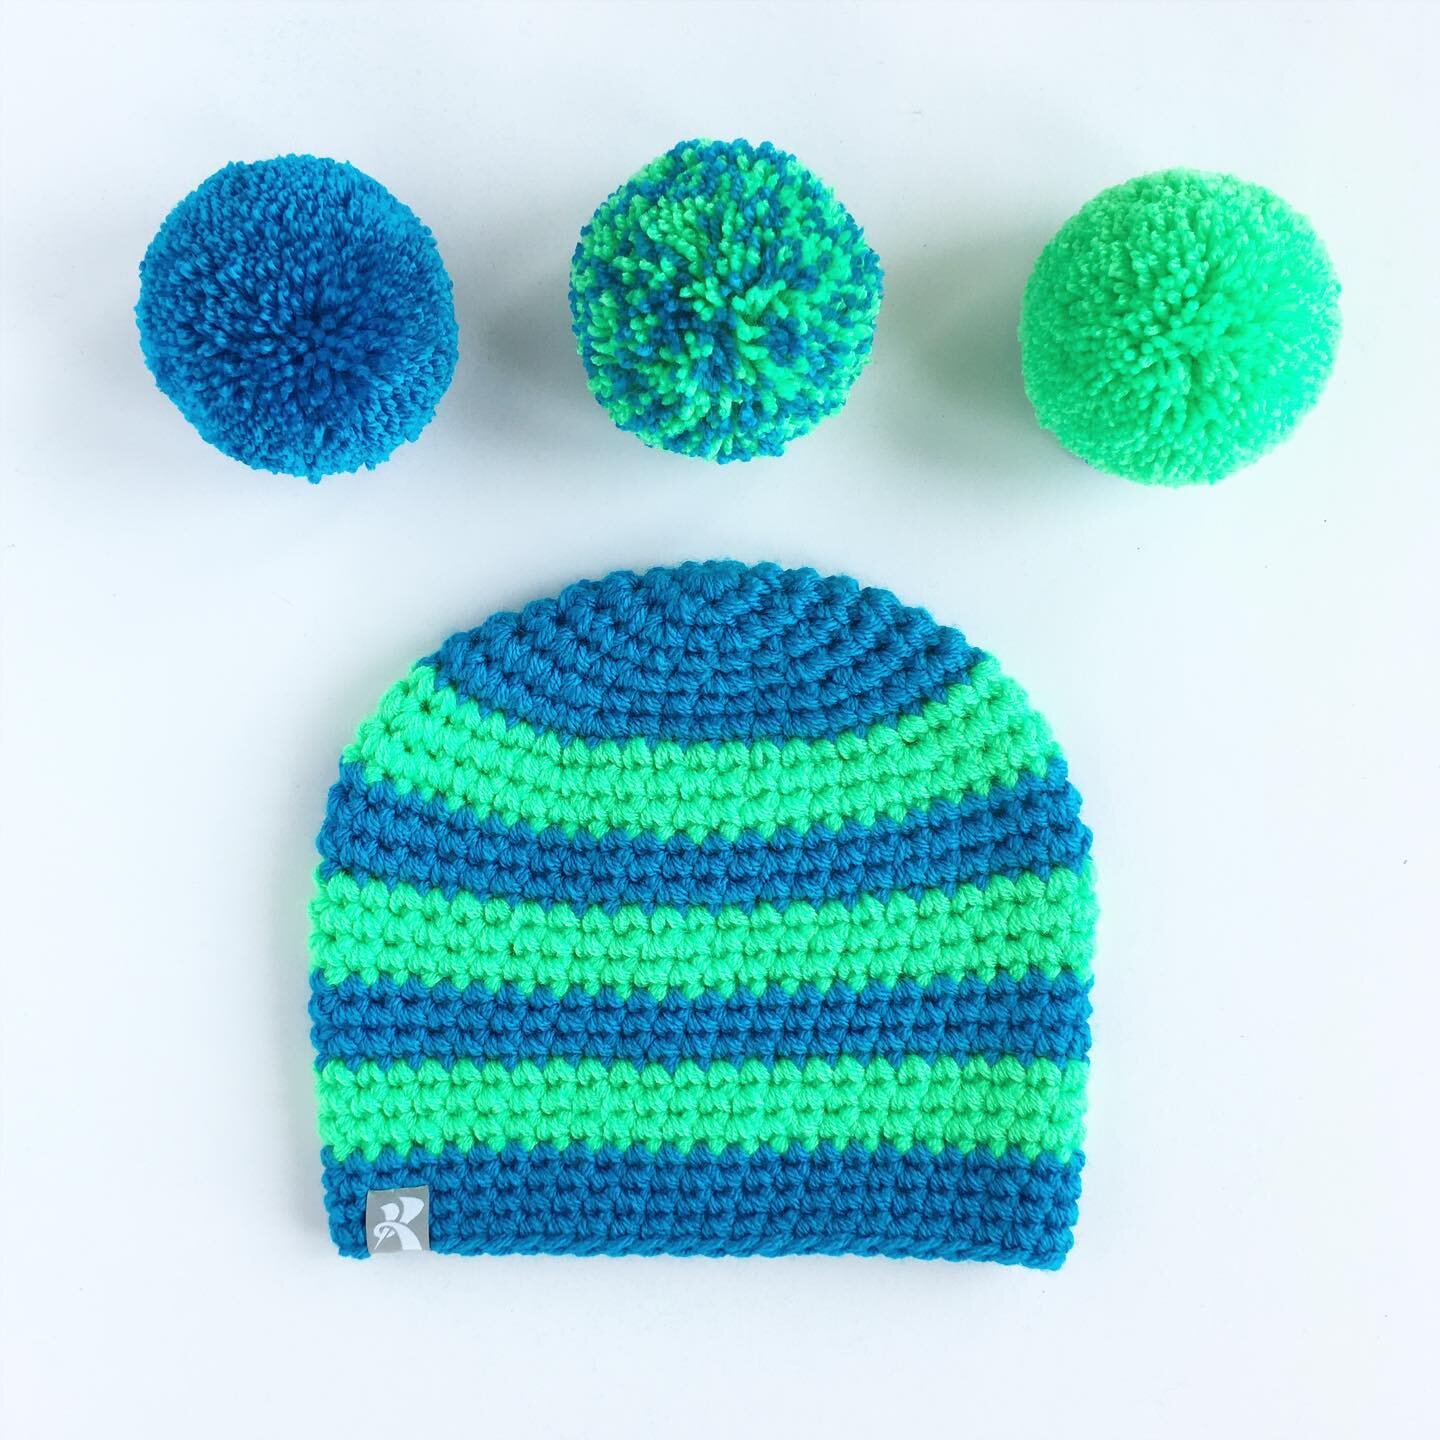 💚💙 GIVEAWAY-CLOSED💙💚
Winter is officially over and as a little thank you for your support this season, I&rsquo;m giving away this beanie with the pompom of your choice!

Rules are super simple:
1) Follow @k_beanies (or @kbeanies if on Facebook)
2